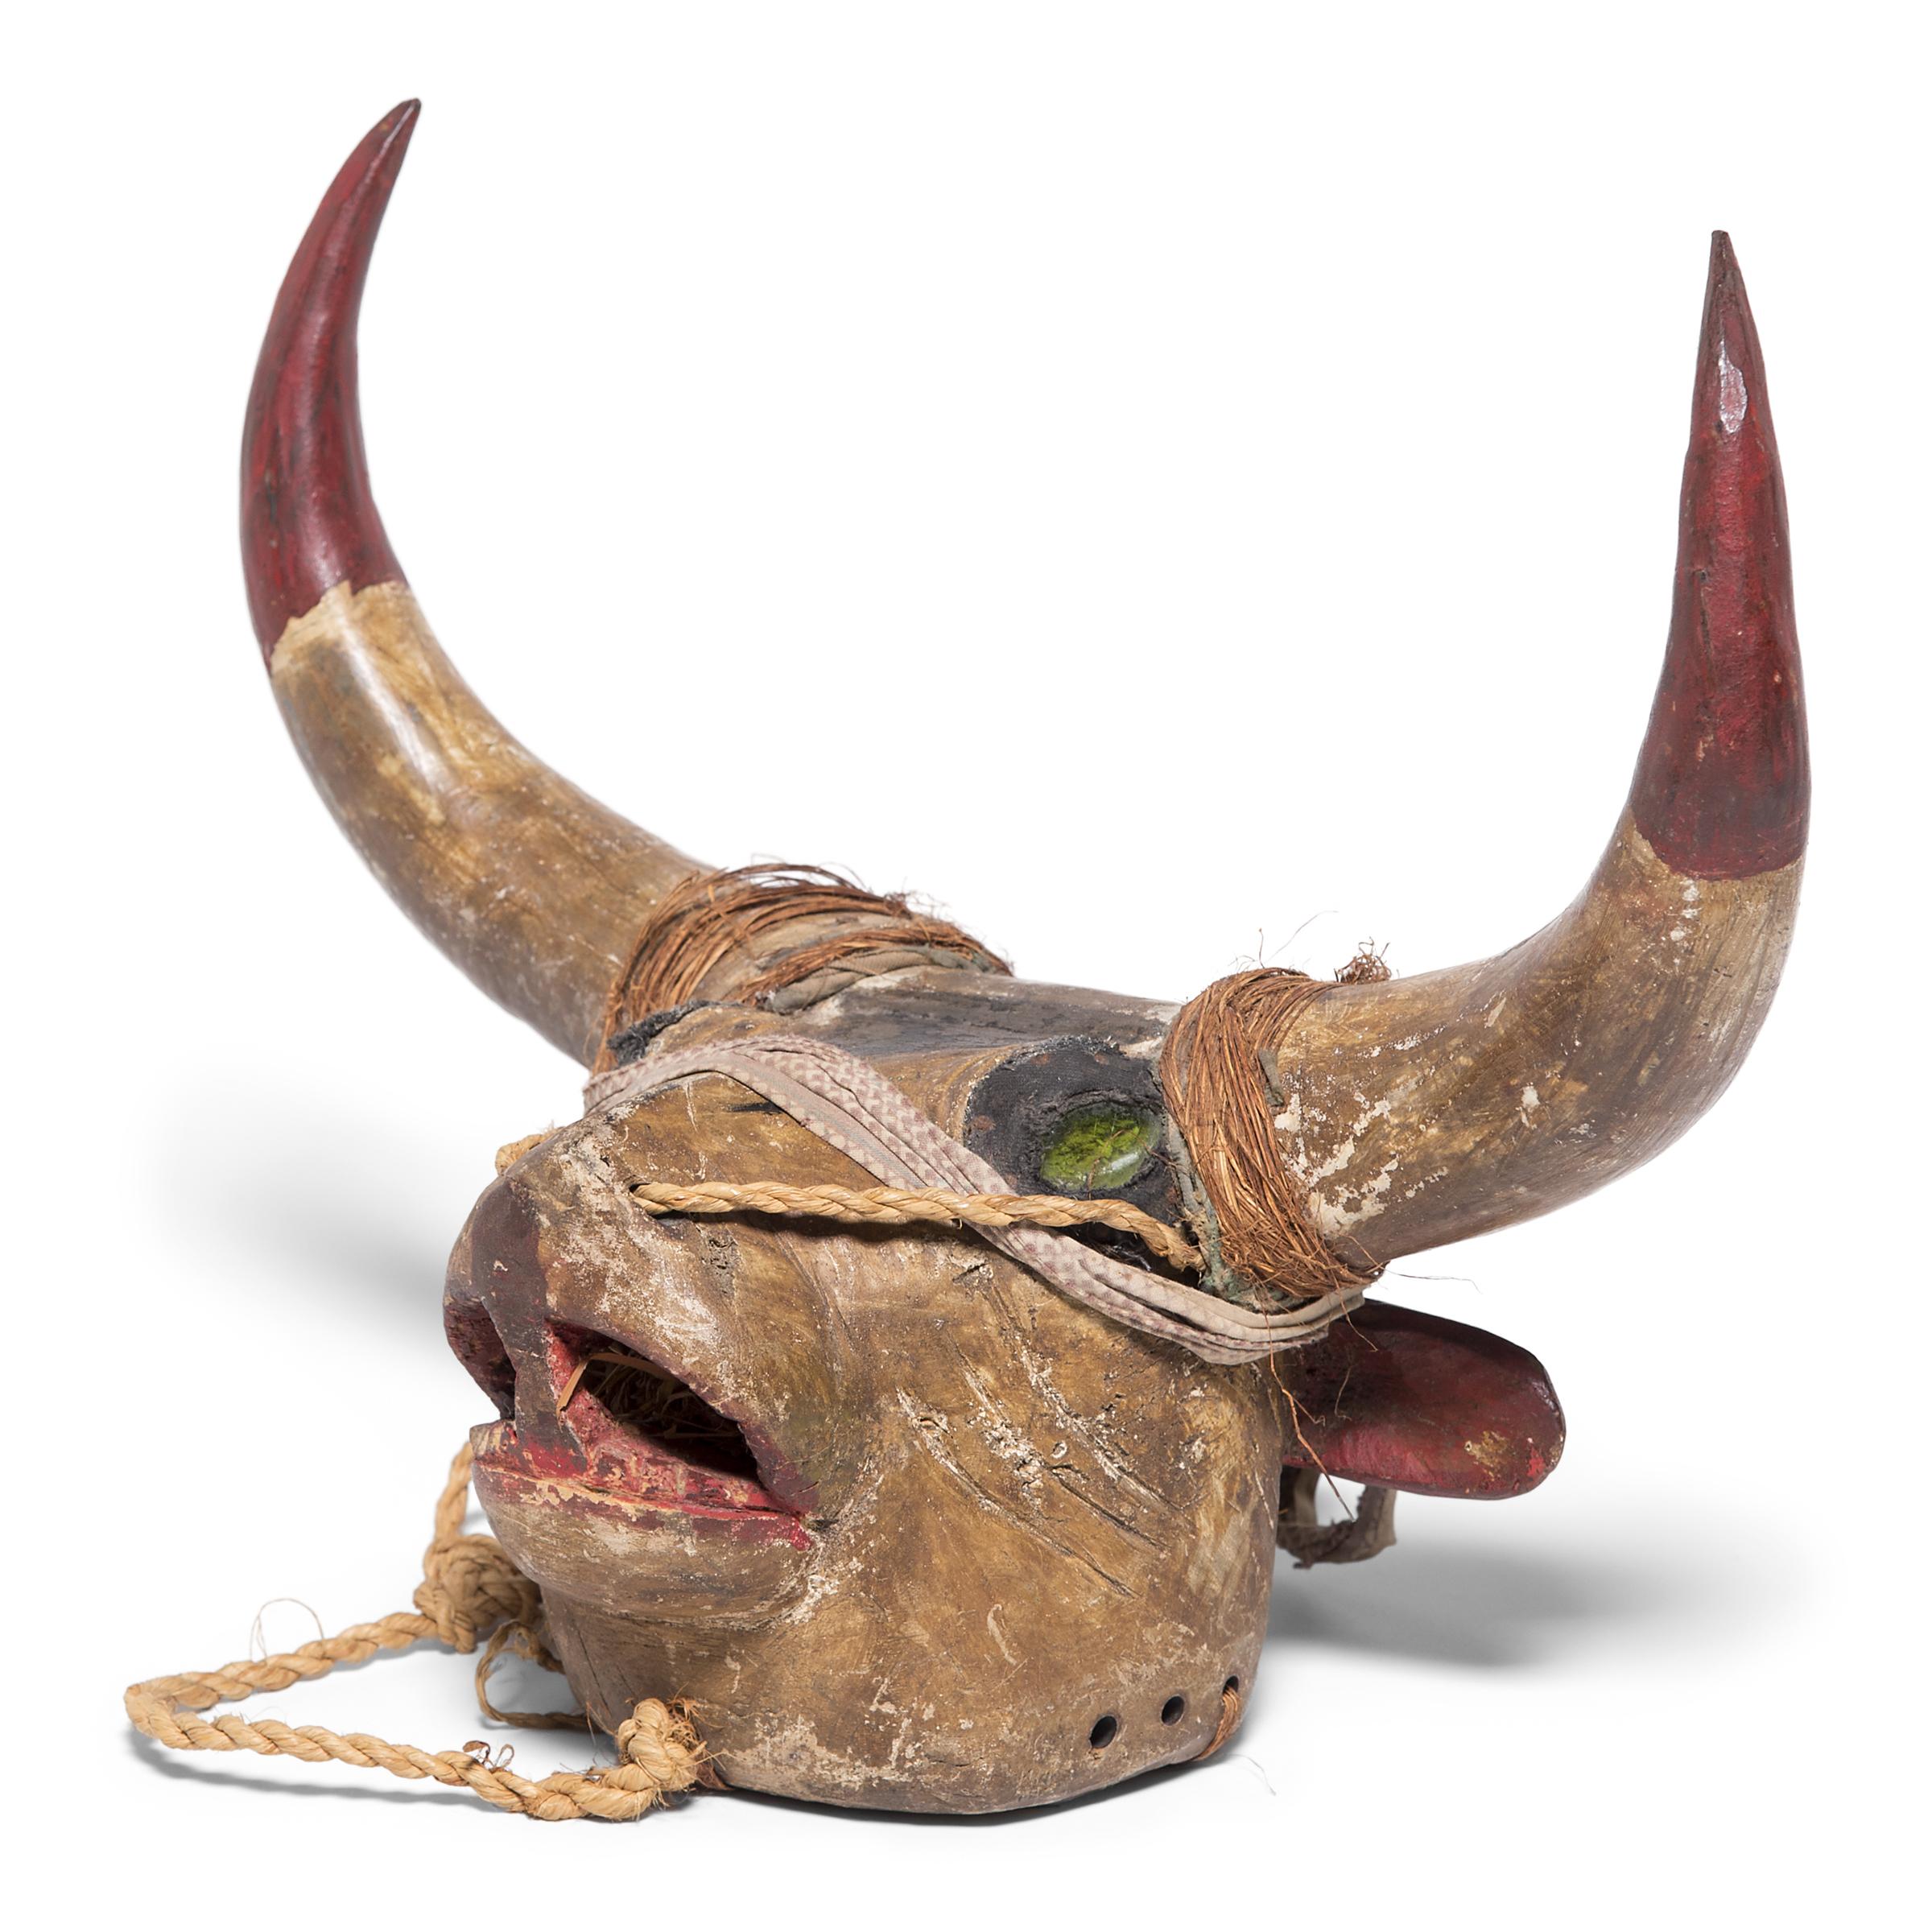 After oxen were introduced to Guinea Bissau by Portuguese sailors in the 15th century, its strength, aggression, and nobility quickly became integrated into their initiation rituals. The organic curves and expressive features of this mask helped